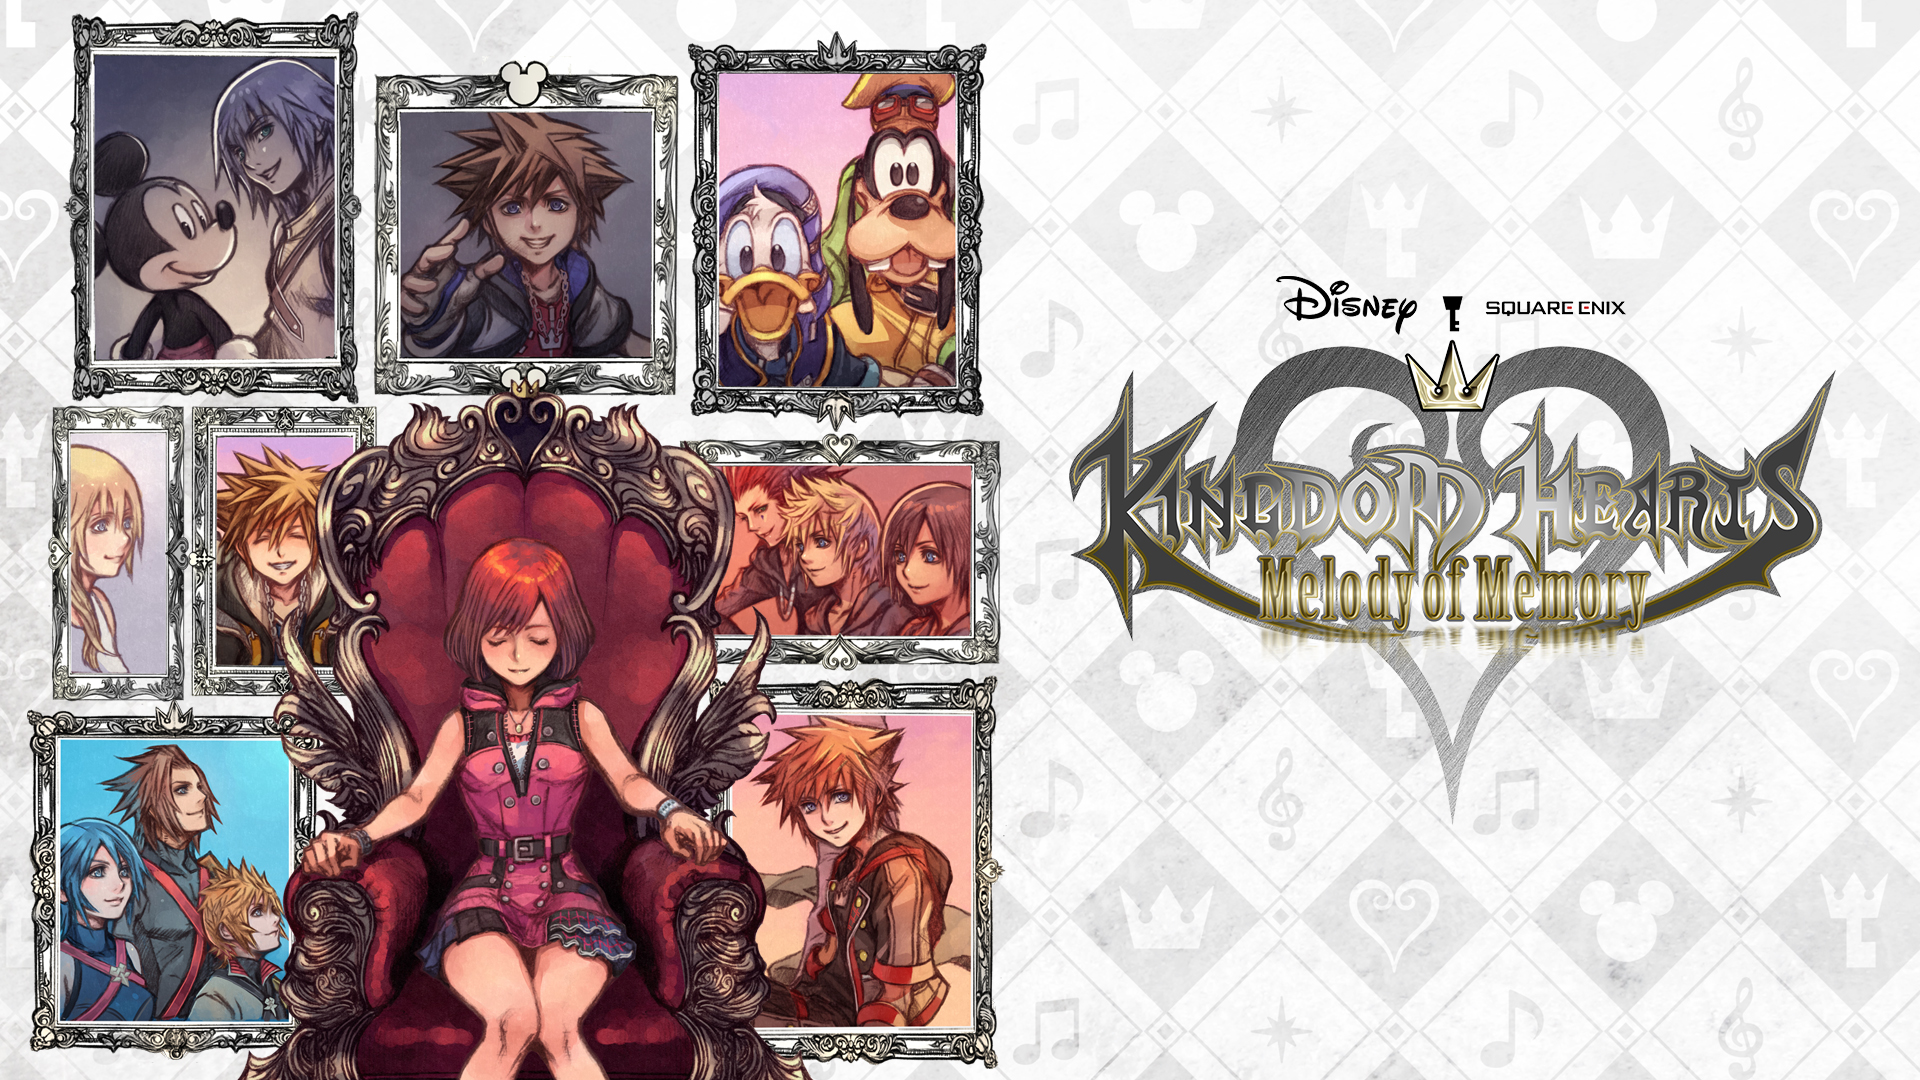 Kingdom Hearts: Melody of Memory' Release Date Announced!